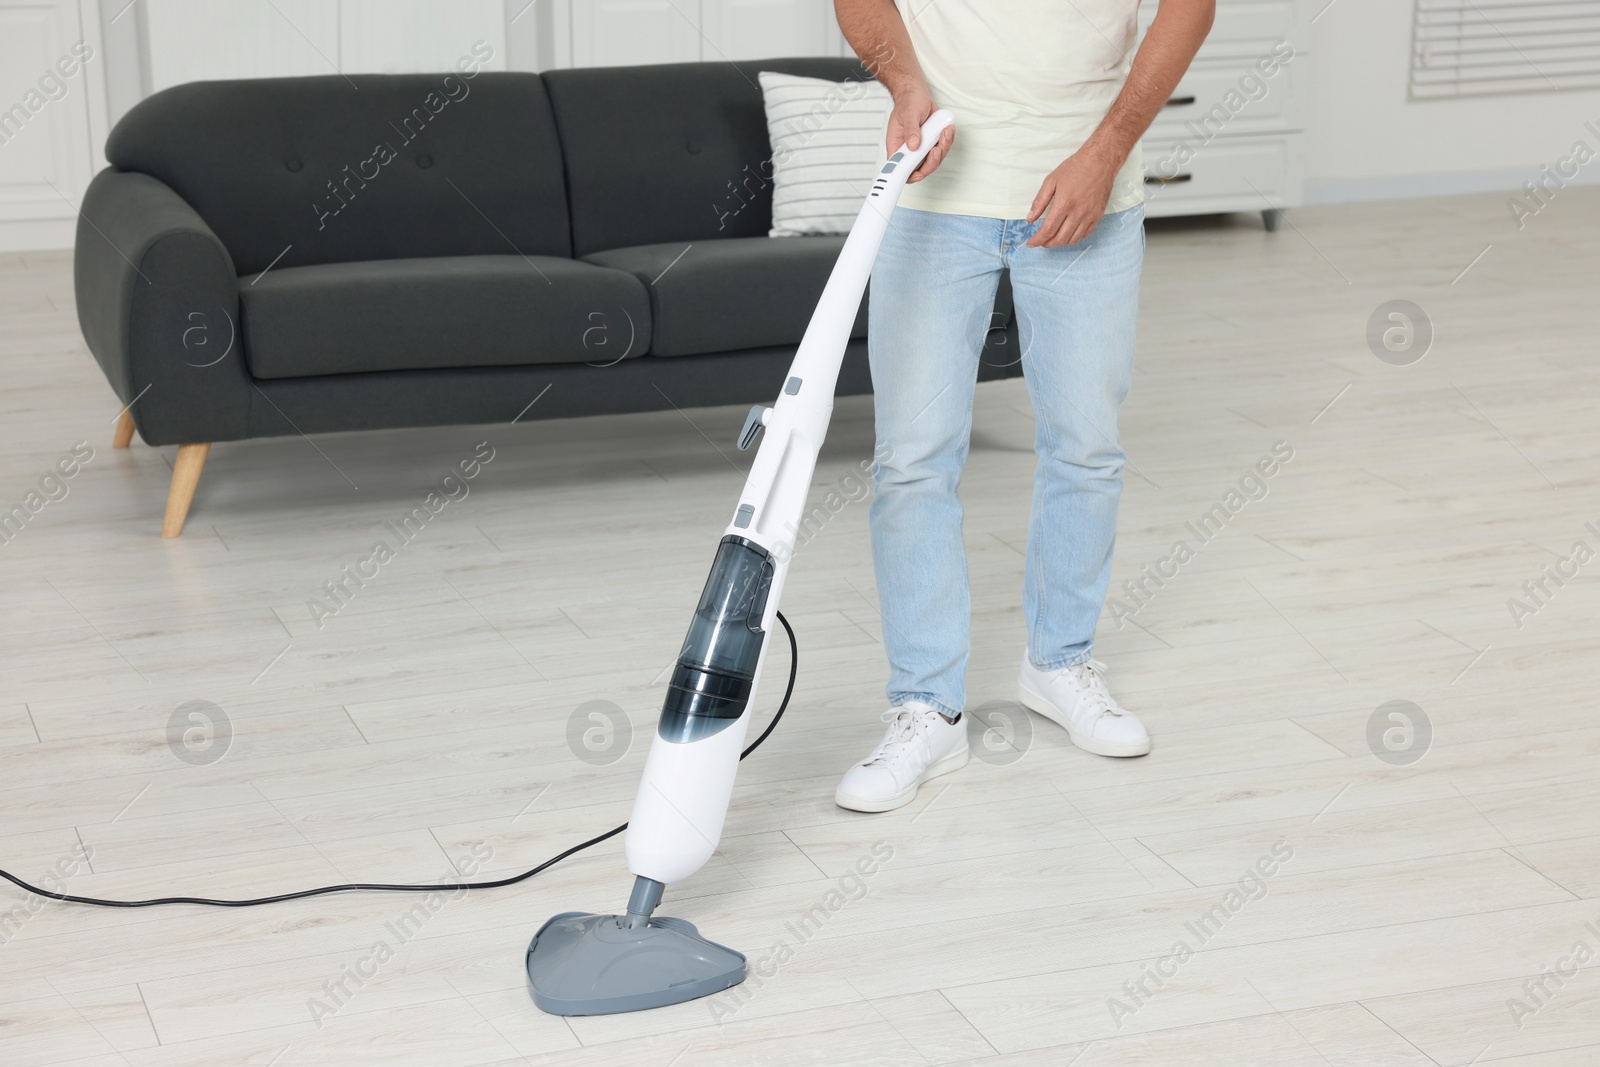 Photo of Man cleaning floor with steam mop at home, closeup